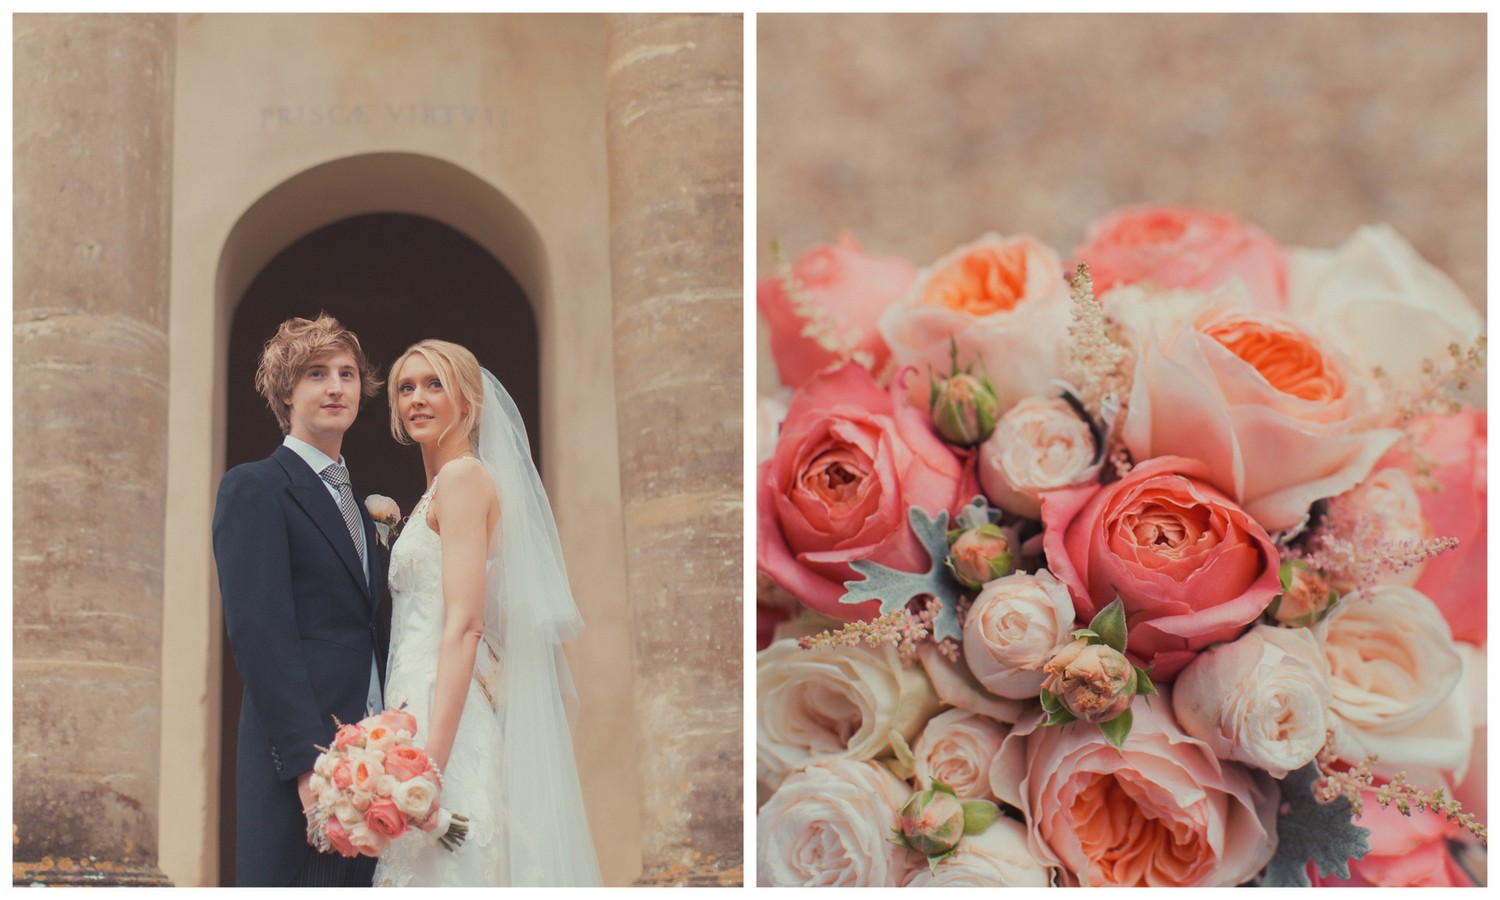 Summer wedding flowers with Garden Romantic & Juliette roses at Courteenhall, Northamptonshire